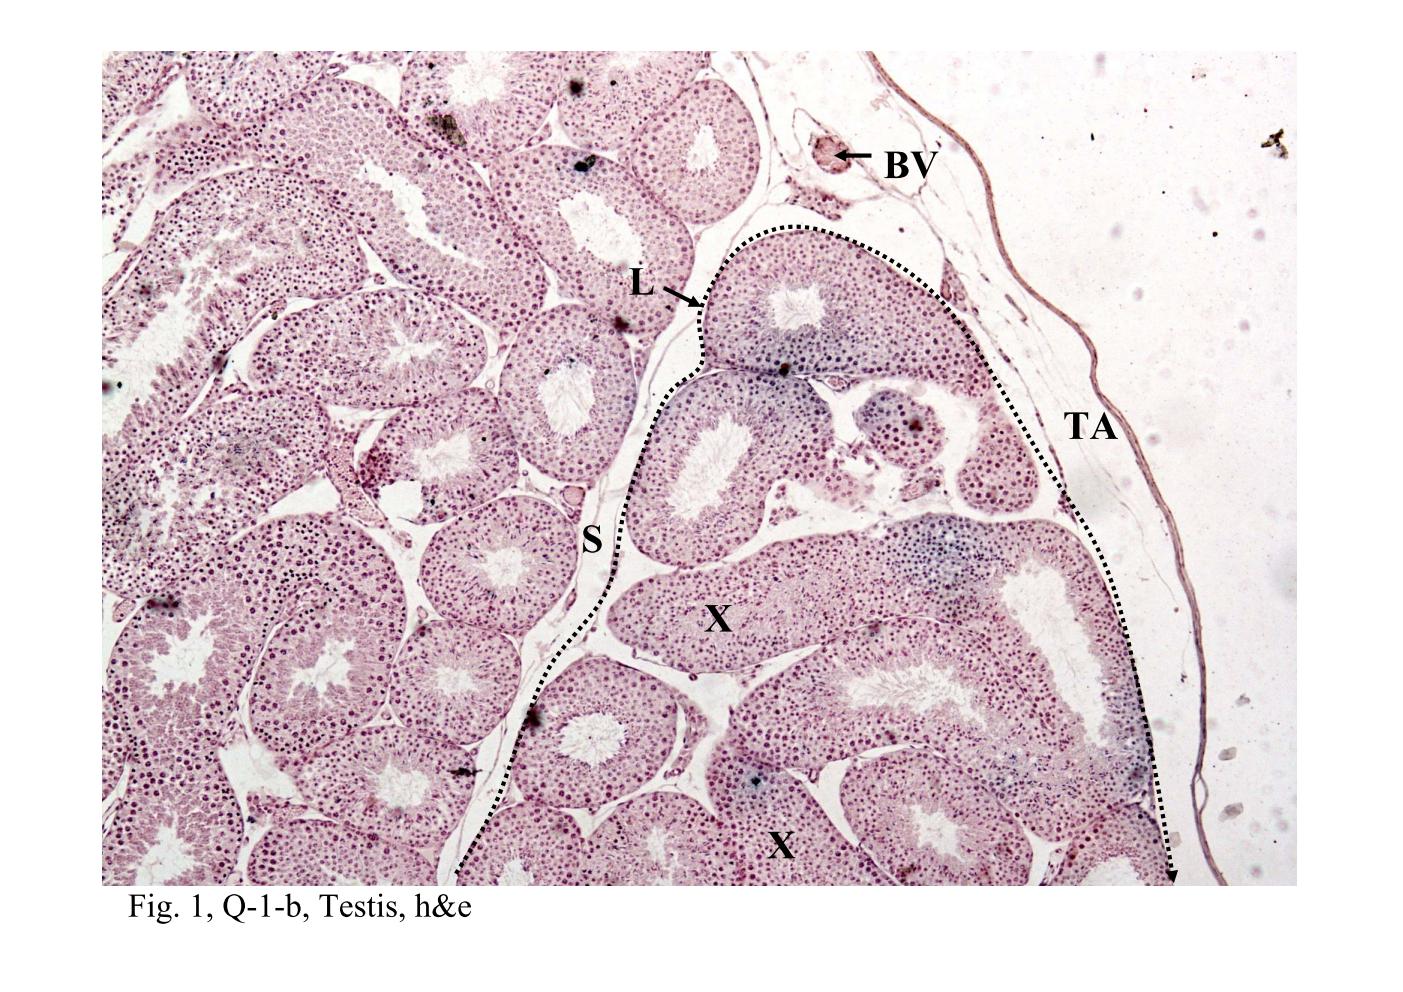 block14_05.jpg - Fig. 1 & 2, Q-1-b, Testis, h&e; 93W7206, Testis, ihThe seminiferous tubules and the tunica albuginea (TA or capsule) of the testis   organ are identified in this section. Extending from the capsule are connective   tissue septa (S) that divide the organ into several ( about 250) compartments or   lobules. Each compartment (L ¡V corresponding to a lobule) contains coiled   seminiferous tubules. Blood vessels (BV) are abundant under the capsule that   located between the tunica albuginea and seminiferous tubules is referred as the   tunica vasculosa. The branches of the blood vessels extending within the   connective tissue septa are also observed.The seminiferous tubules are convoluted, therefore, the profiles of them present in a   section are variable in appearance. Sometimes, the wall of a tubule is sectioned   tangentially, thus obscuring the lumen and revealing what appears to be a solid   mass of cells (X).